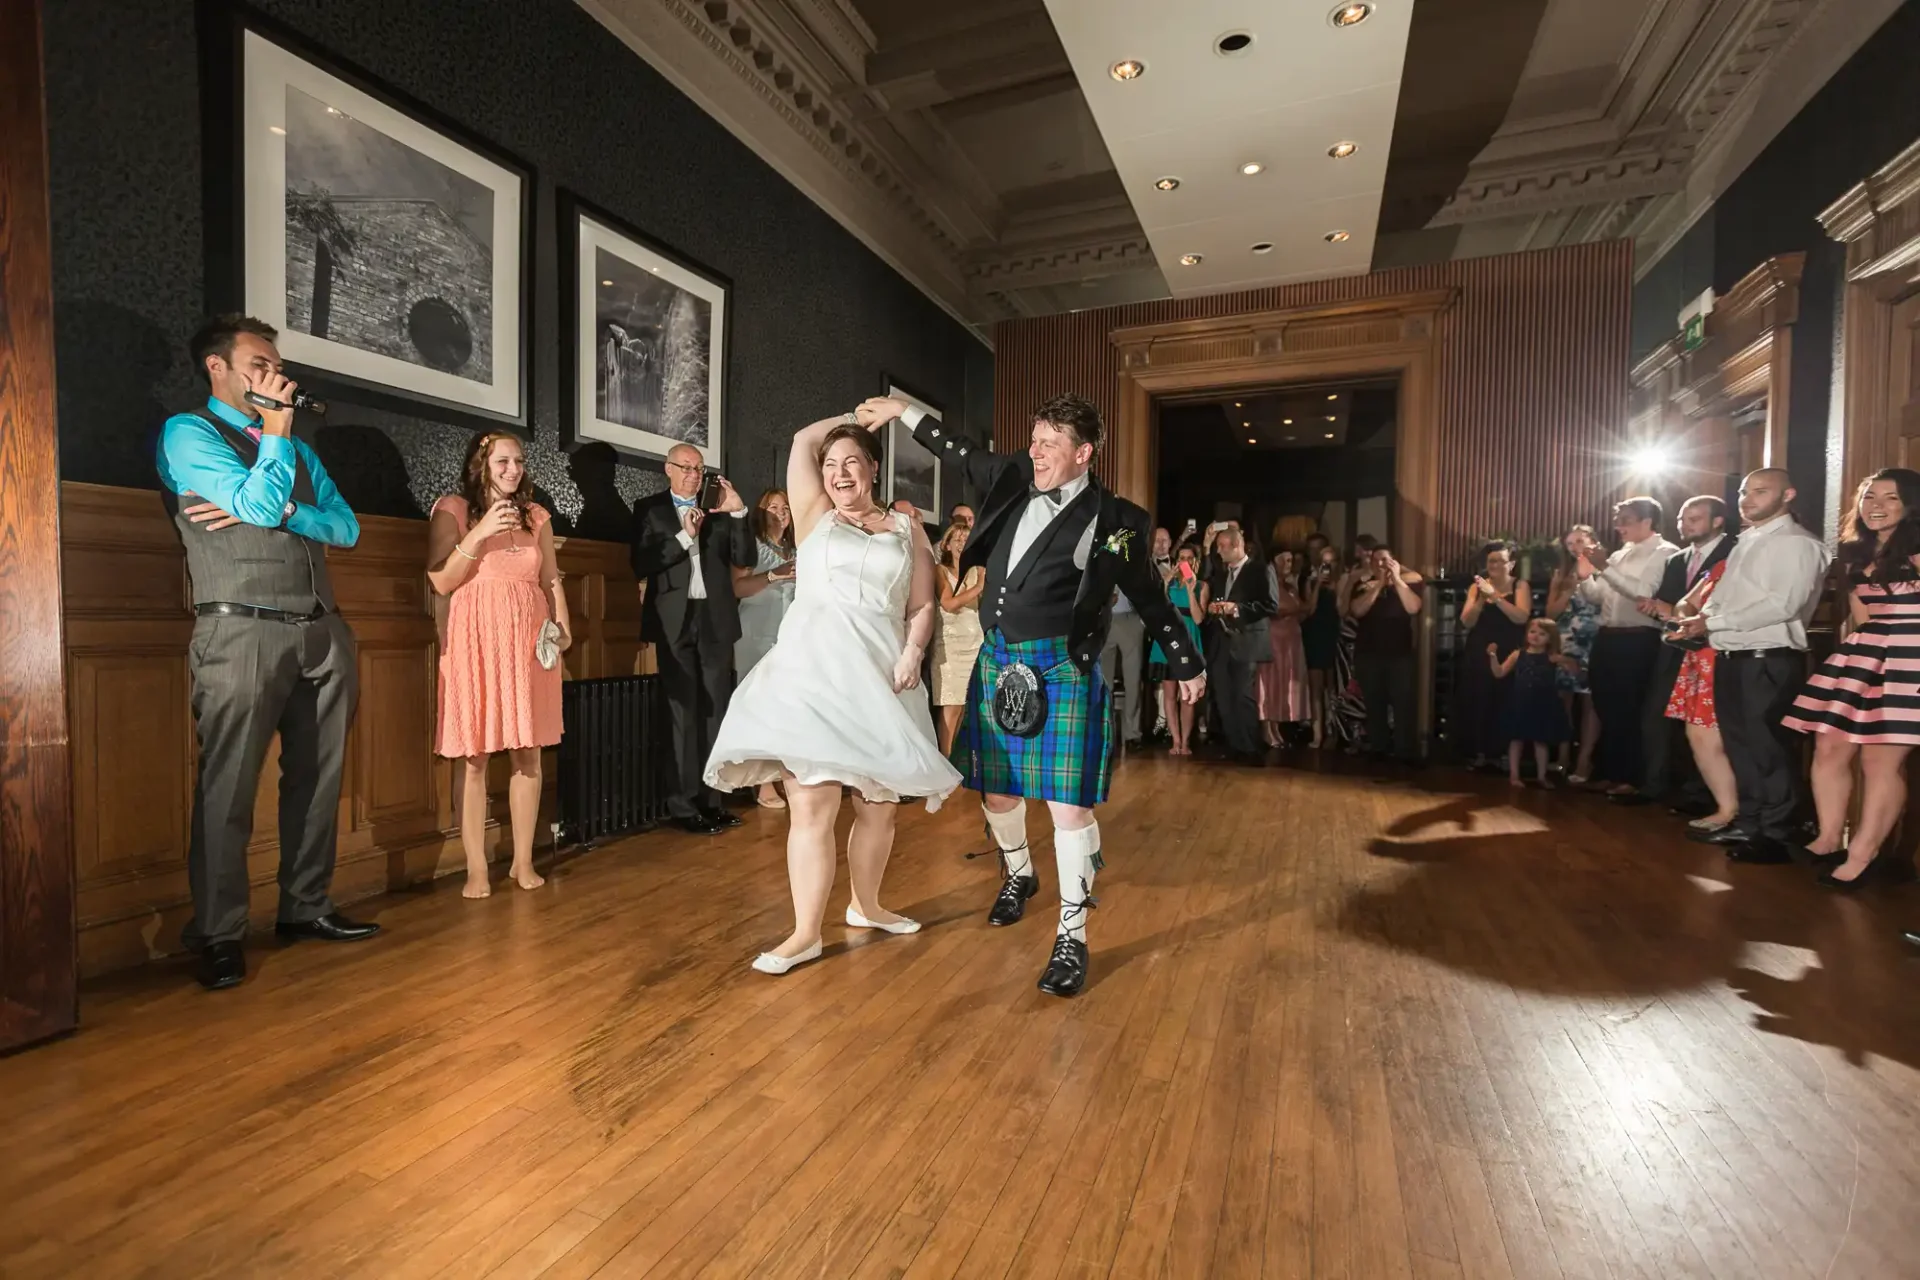 Bride and groom joyfully dancing in a hall with onlookers, the groom wearing a kilt and the bride in a short wedding dress.